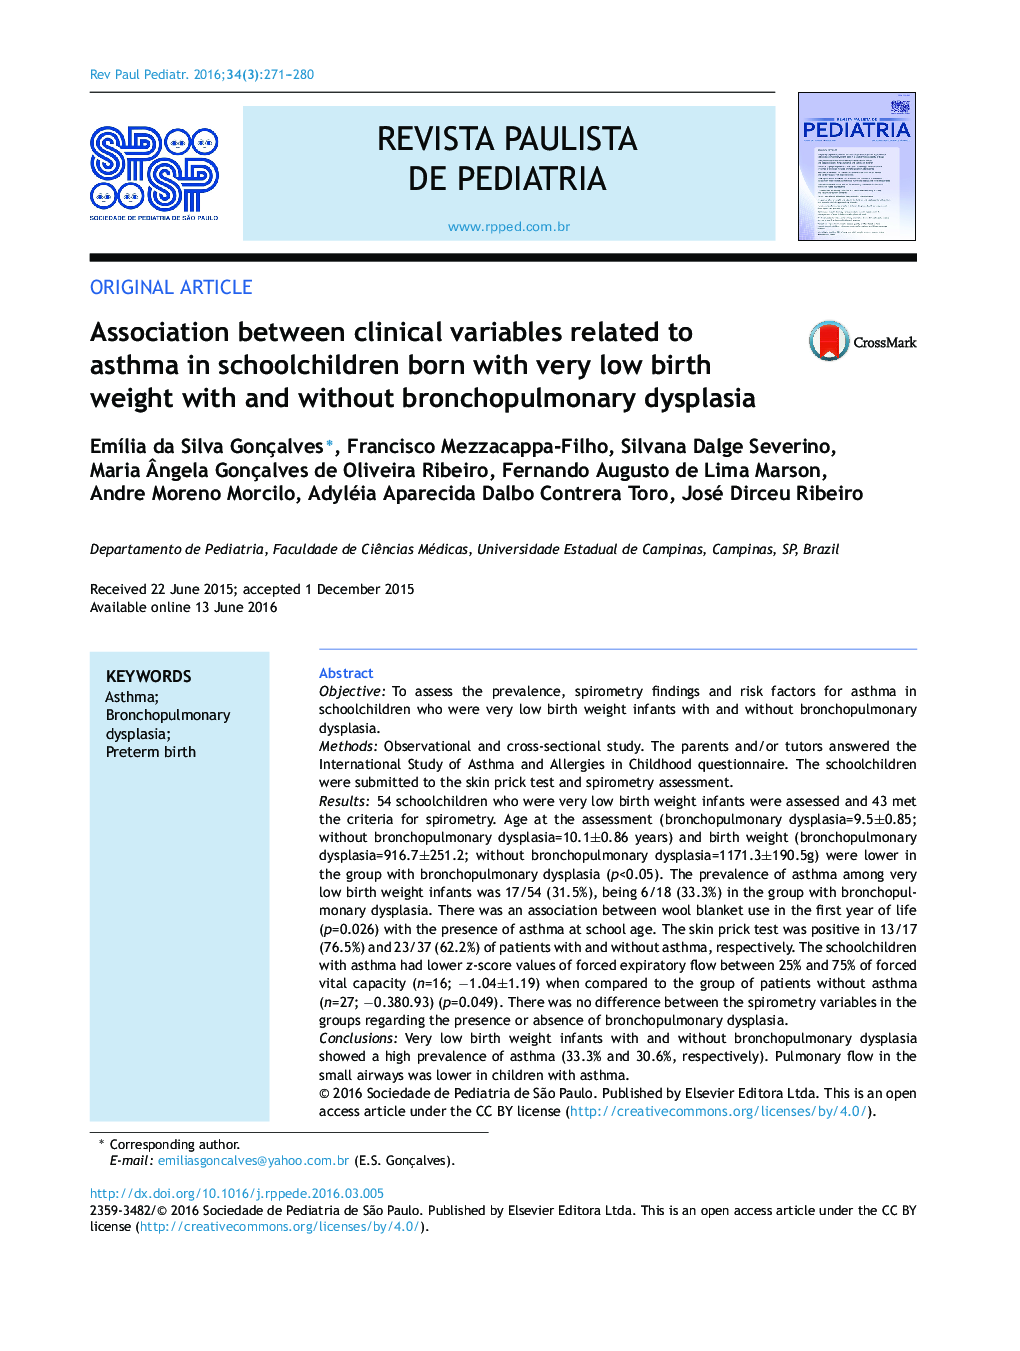 Association between clinical variables related to asthma in schoolchildren born with very low birth weight with and without bronchopulmonary dysplasia